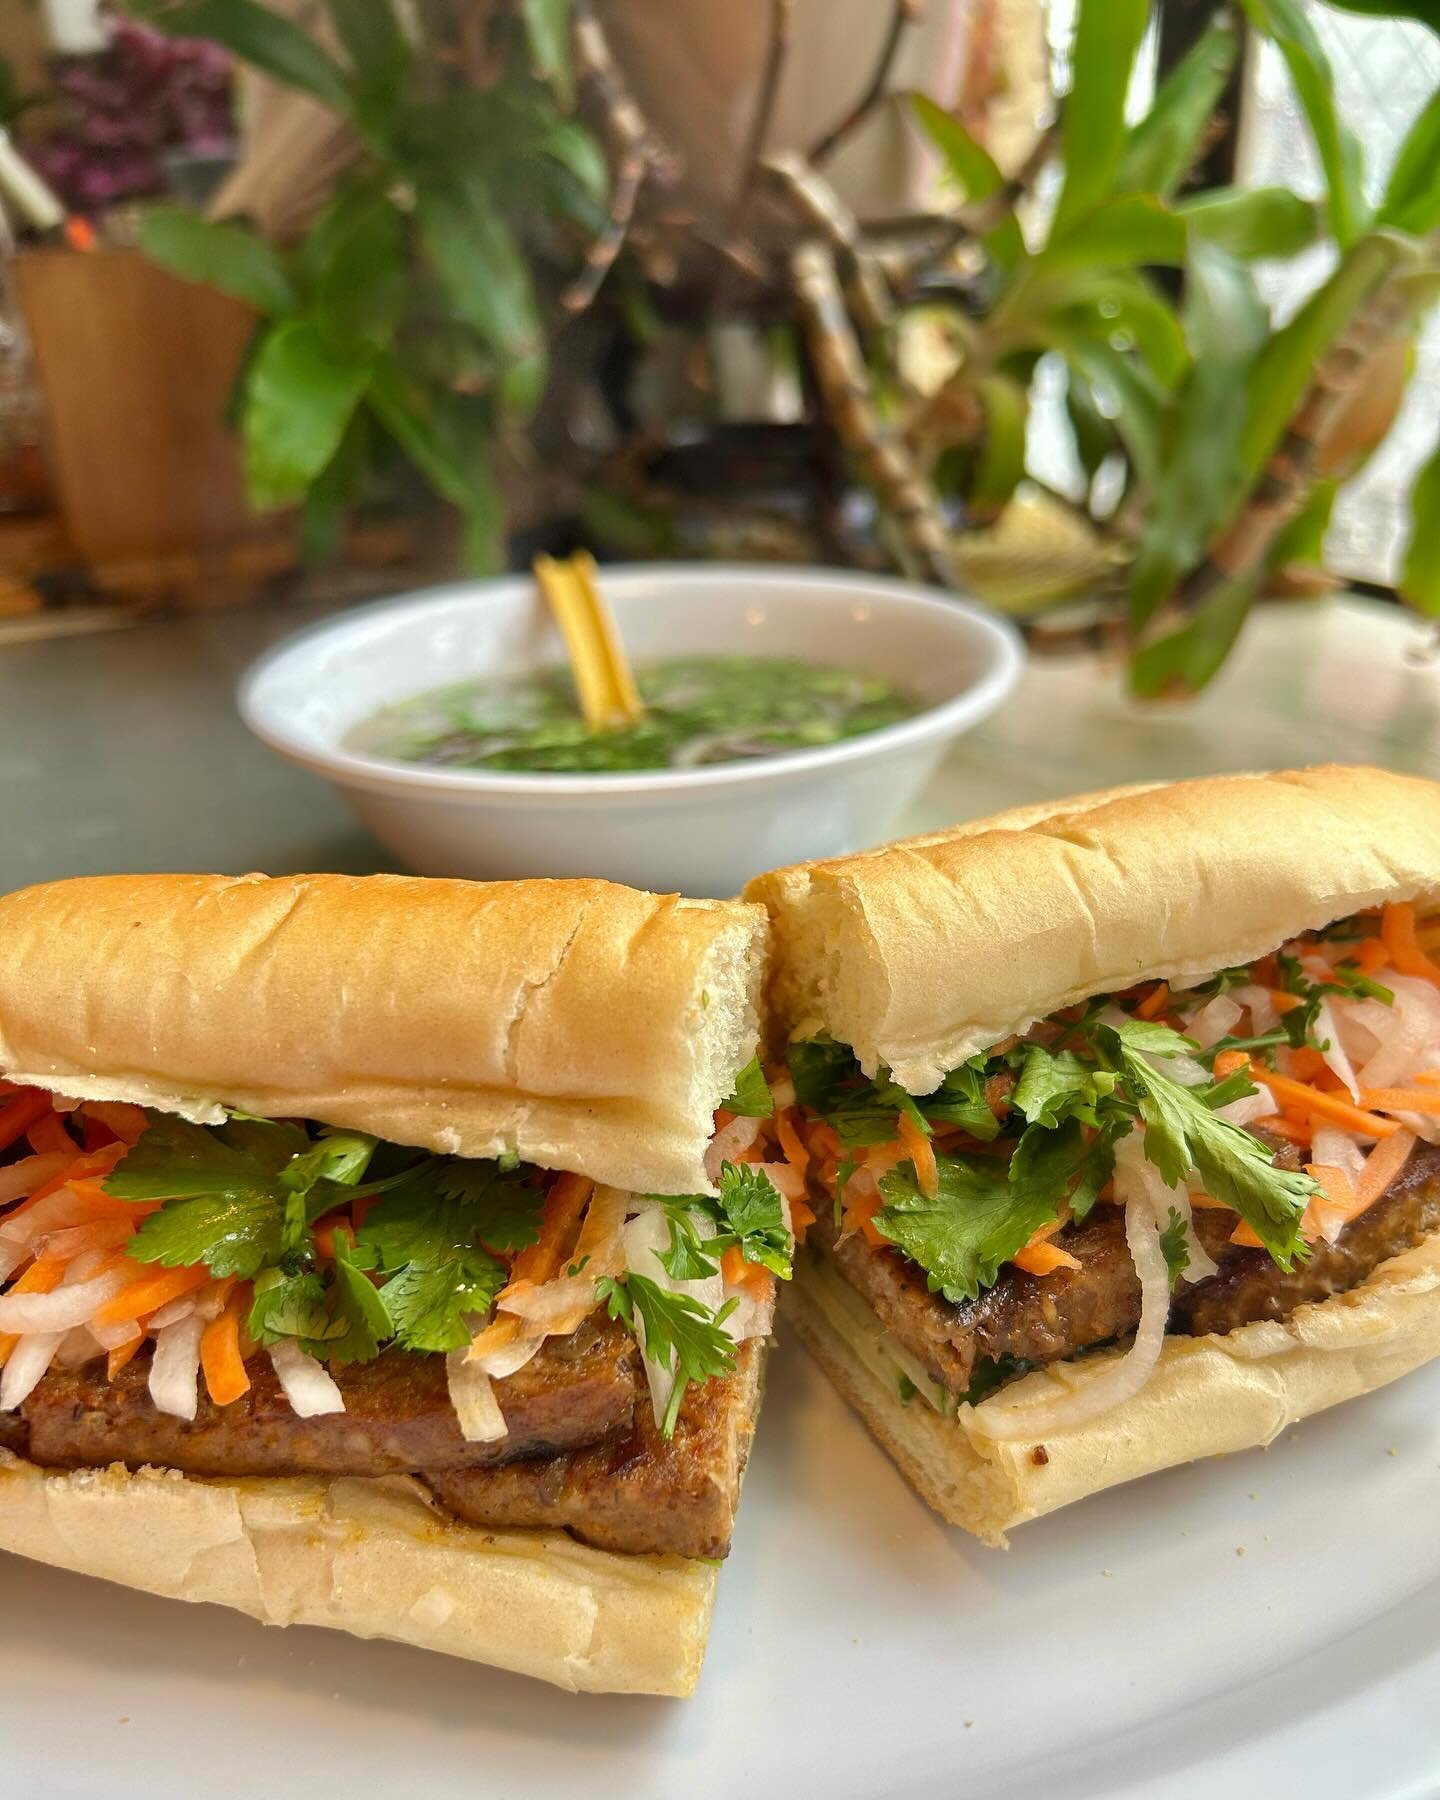 today is International Day of Sharing a Pork Loaf B&aacute;nh M&igrave; and Bebe Phở with Your Bestie, Crush, Favorite Mail Person, New Therapist, Lacrosse Team Captain, Second-Cousin&rsquo;s Fourth Husband, Ex Dry Cleaner, or Clone! Who are u celebr